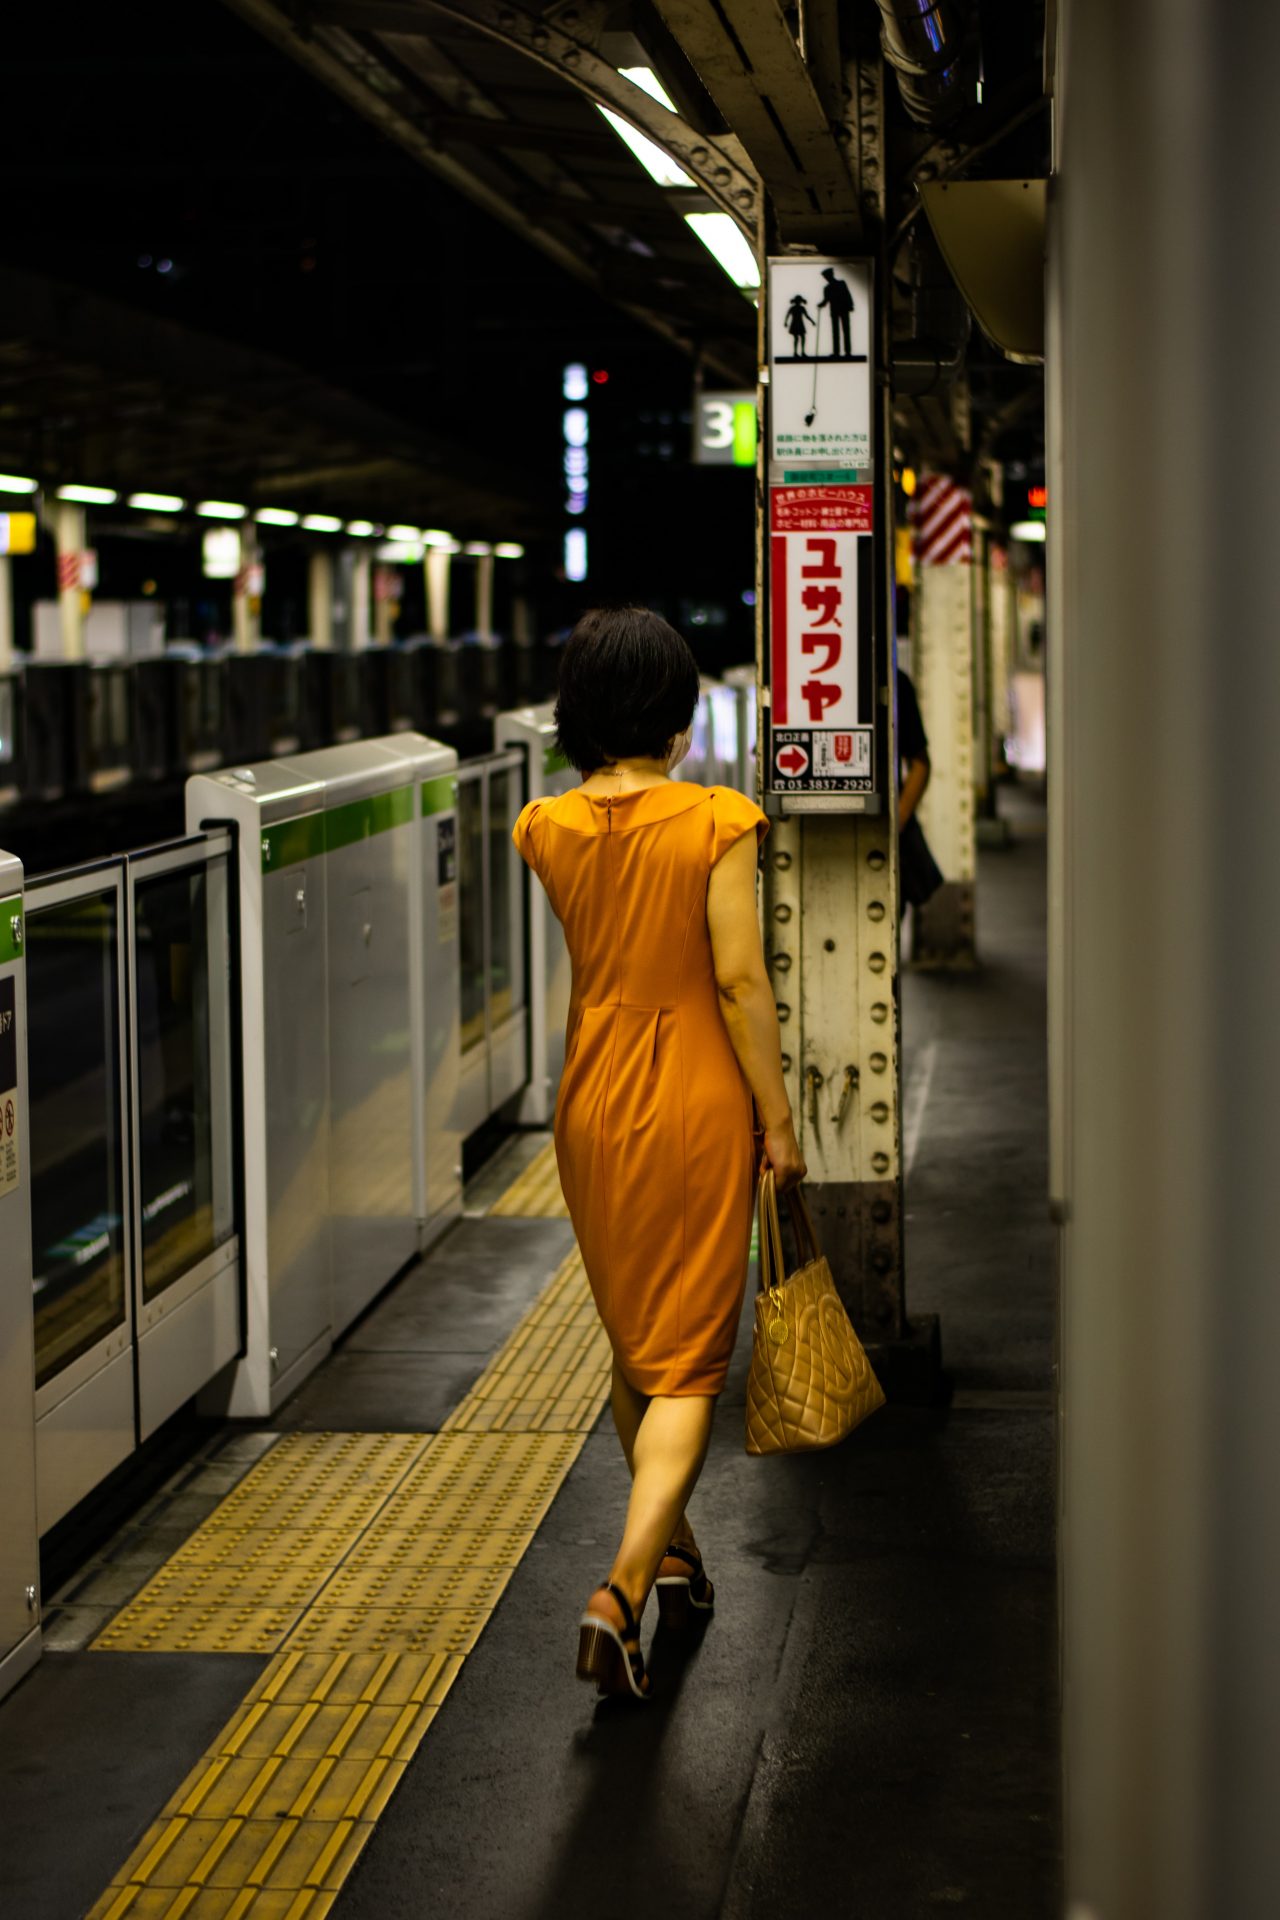 train station photography session with a women in orange dress